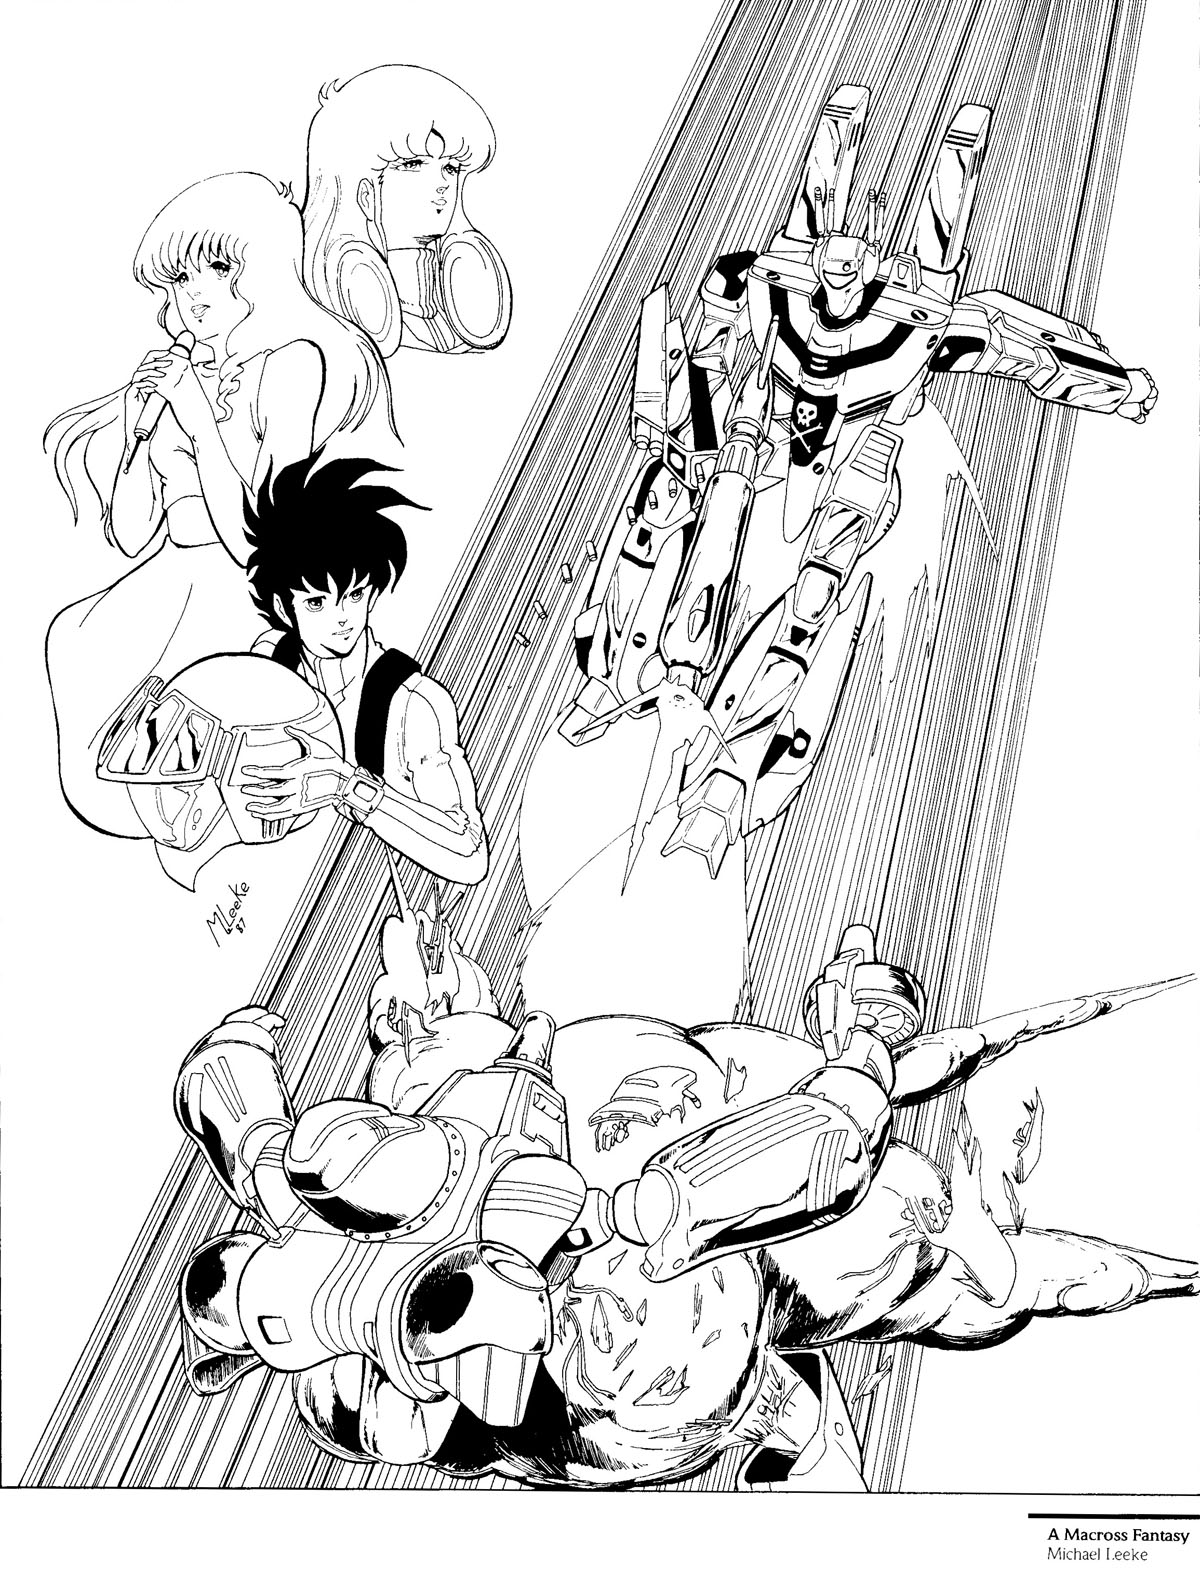 Robotech Art 2 - New Illustrations and Original Art from The Robotech Unive...